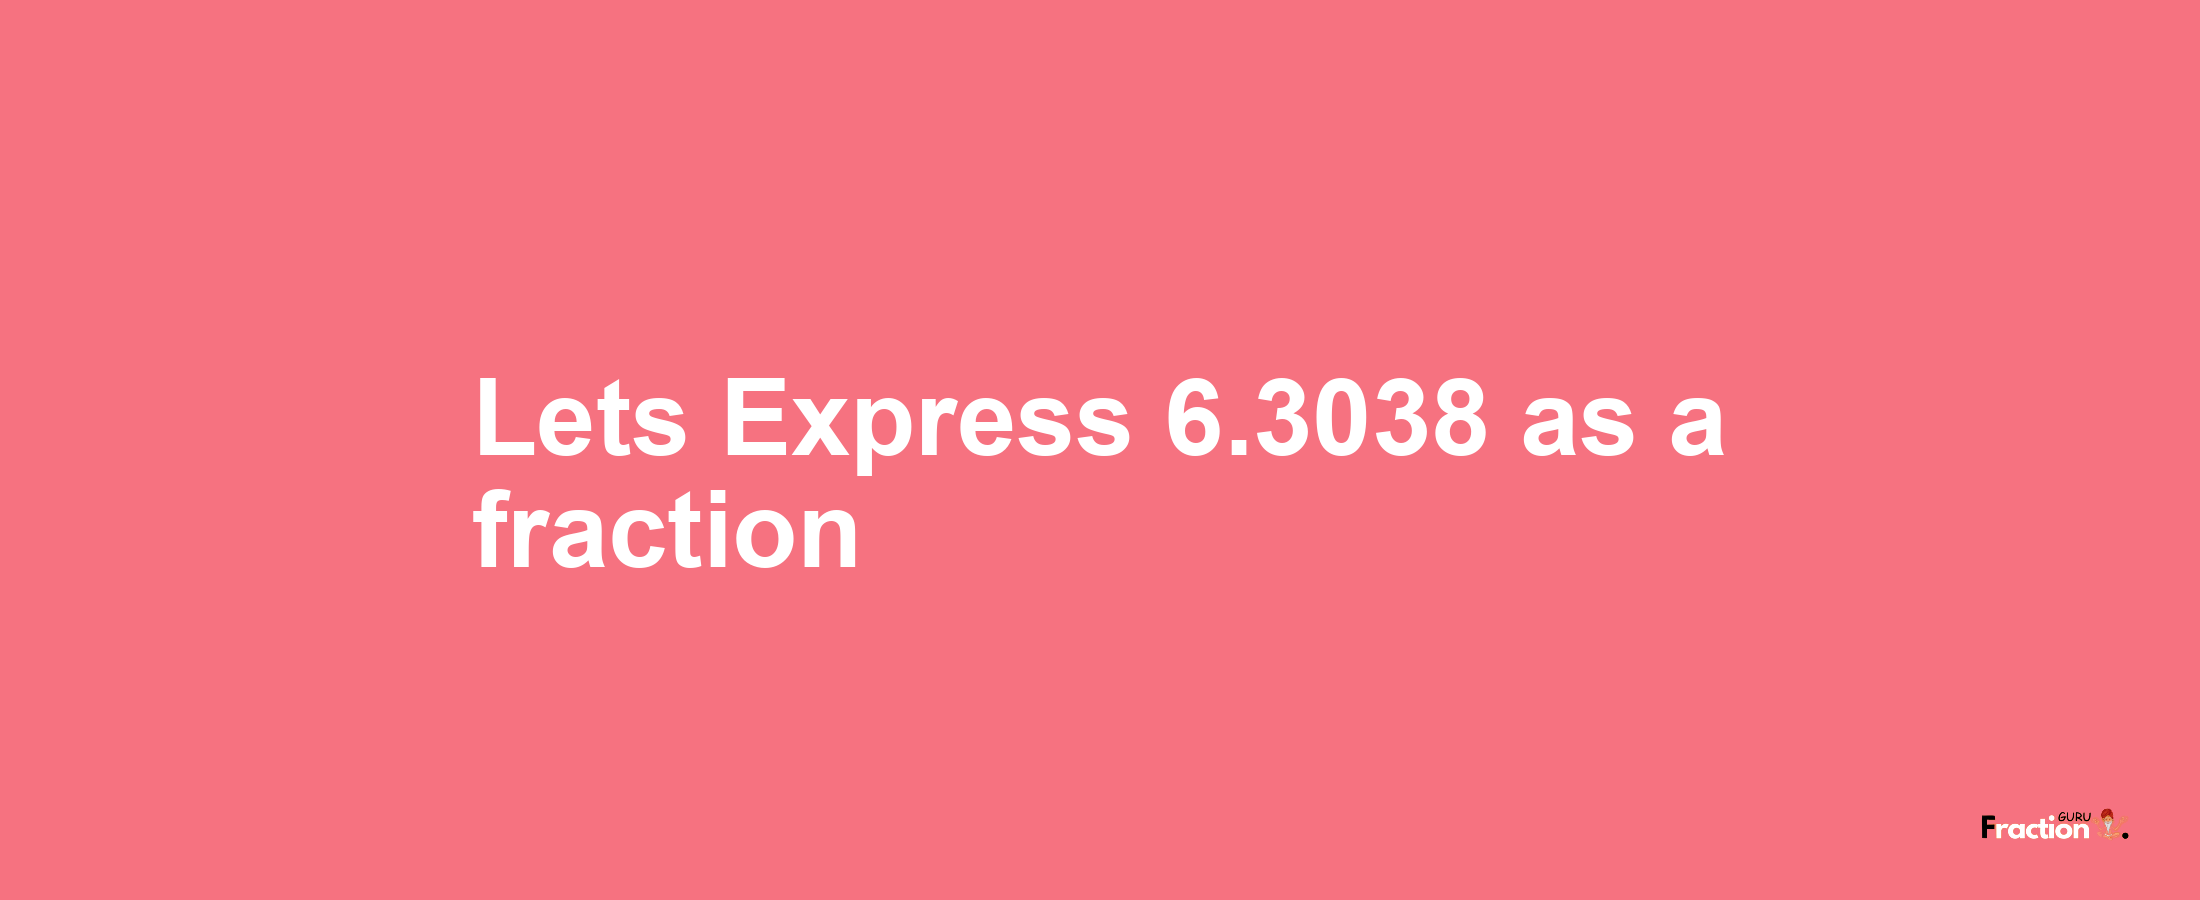 Lets Express 6.3038 as afraction